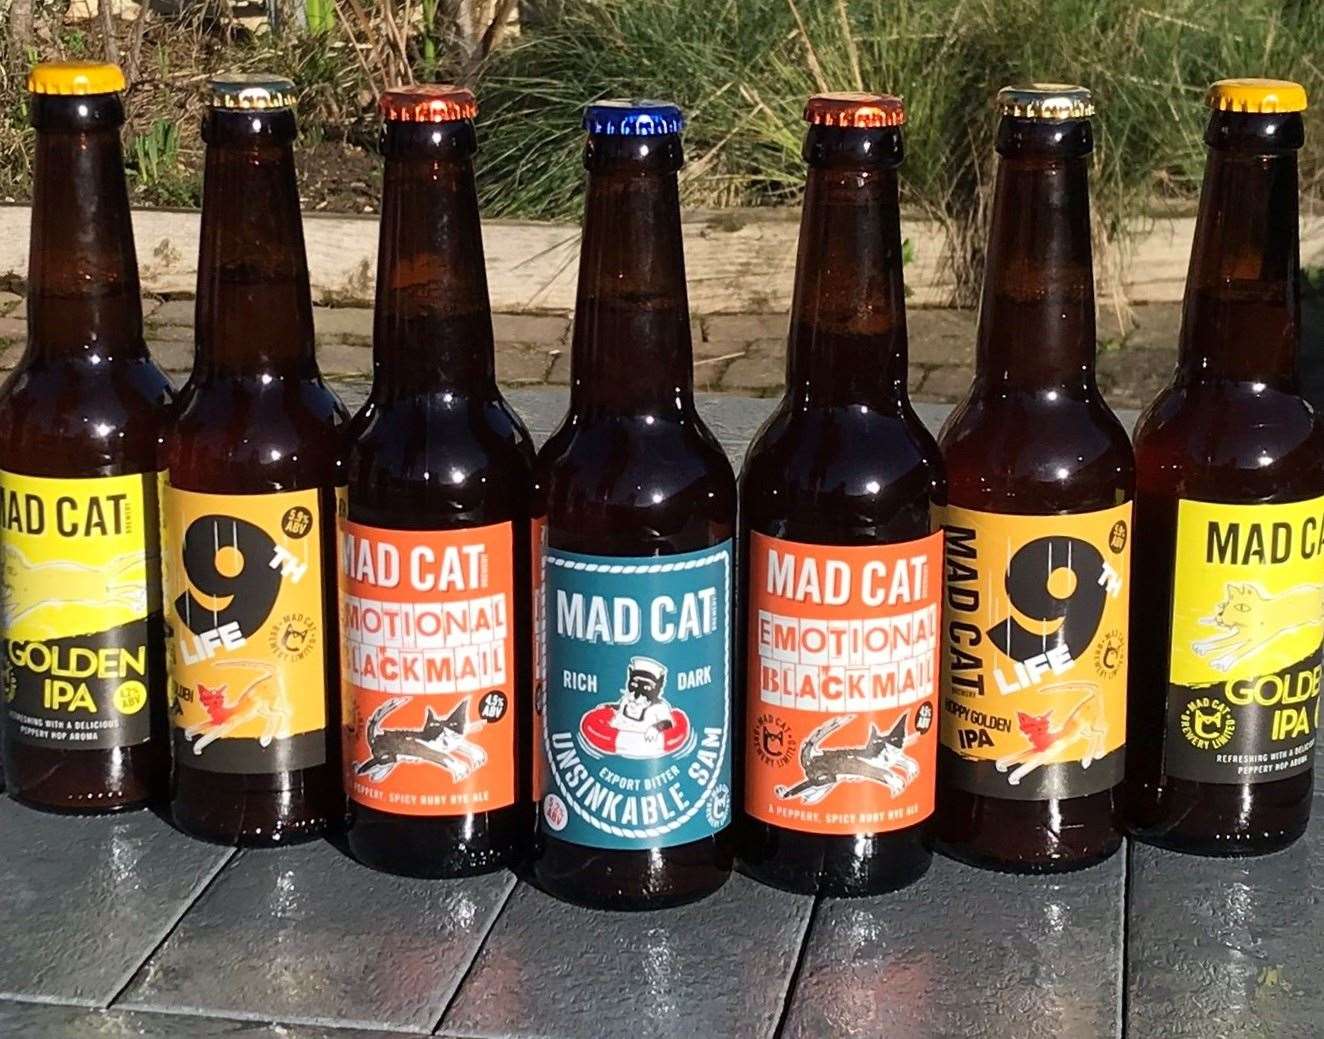 Beers from Faversham's Mad Cat Brewery - they admire what BrewDog has achieved but says its influence has been minimal on the market